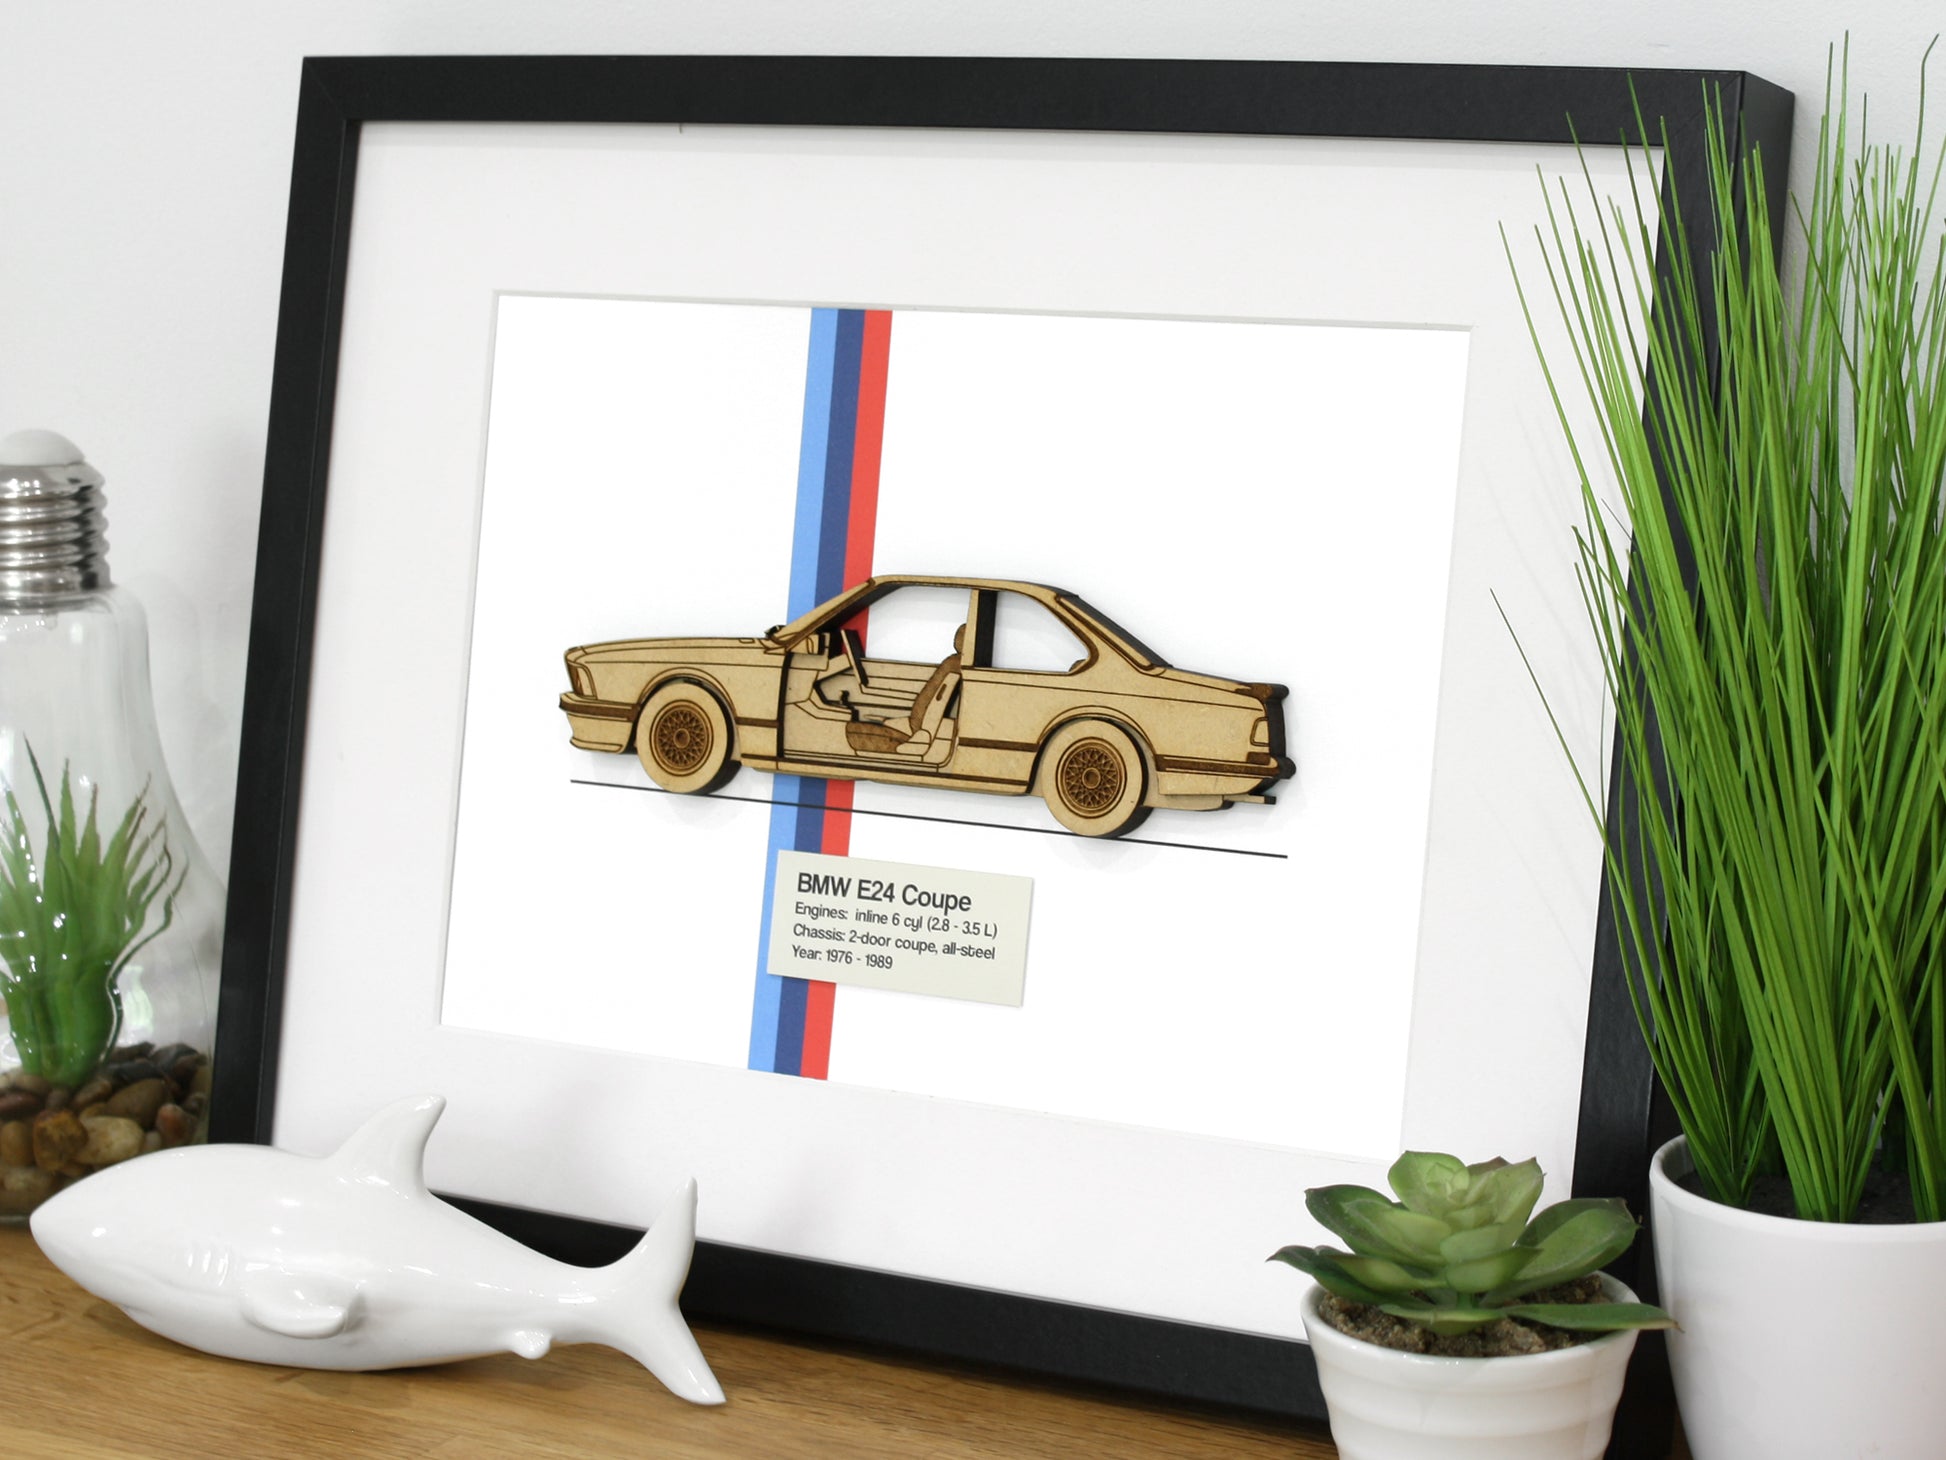 BMW 6 Series Coupe E24 car gift